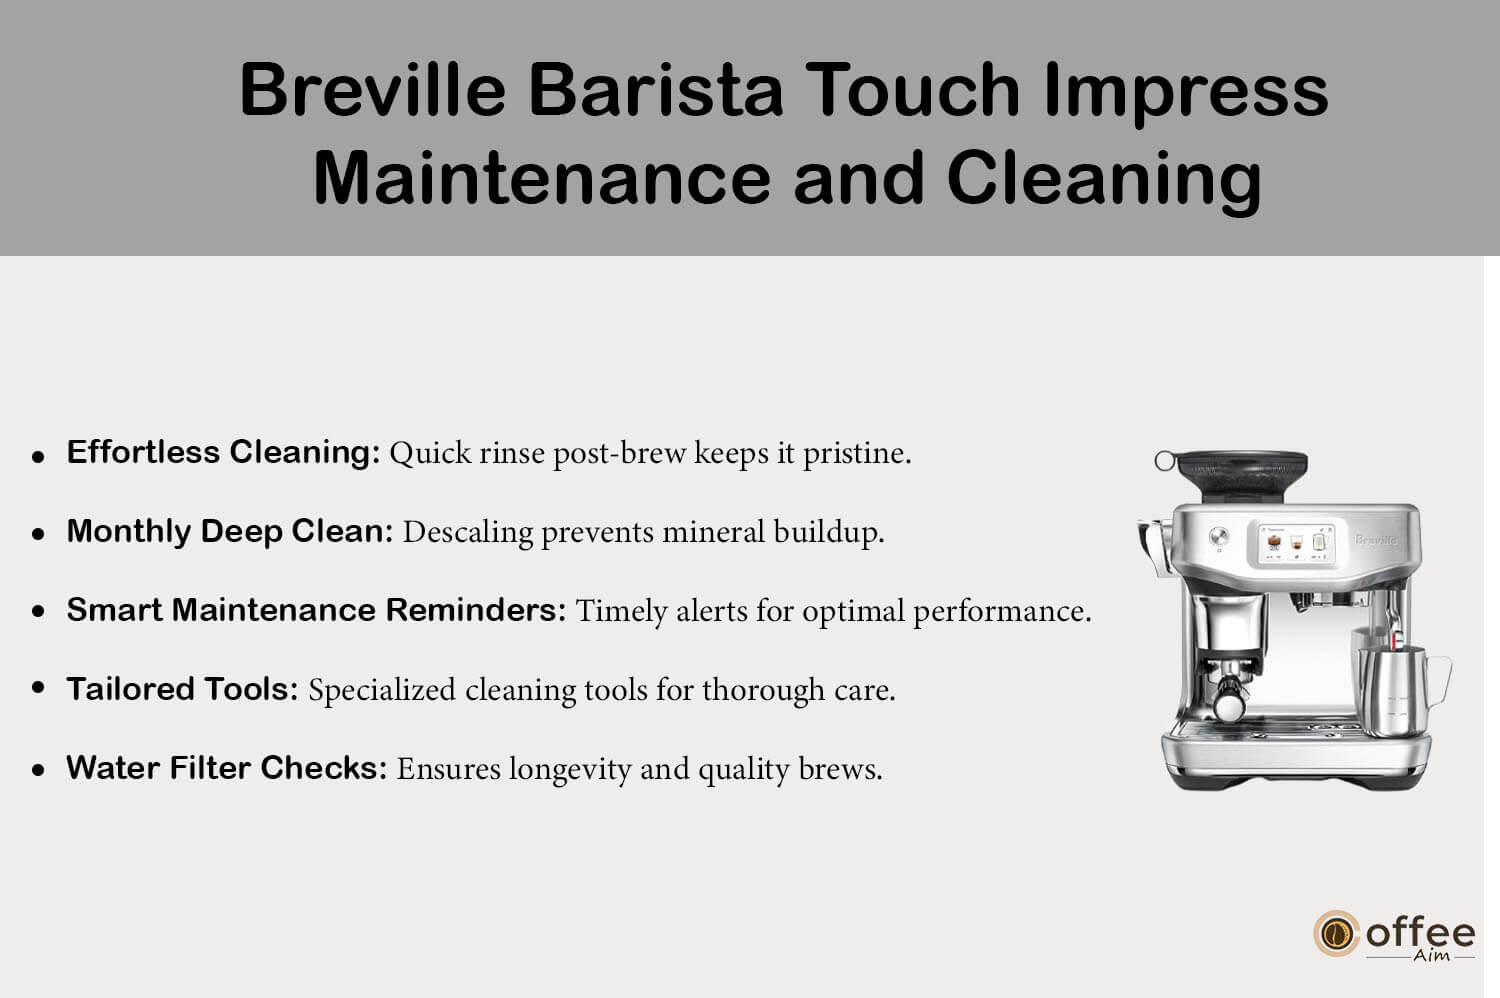 "This visual showcases the upkeep and cleaning procedures for the 'Breville Barista Touch Impress', as detailed in our 'Breville Barista Touch Impress Review'."